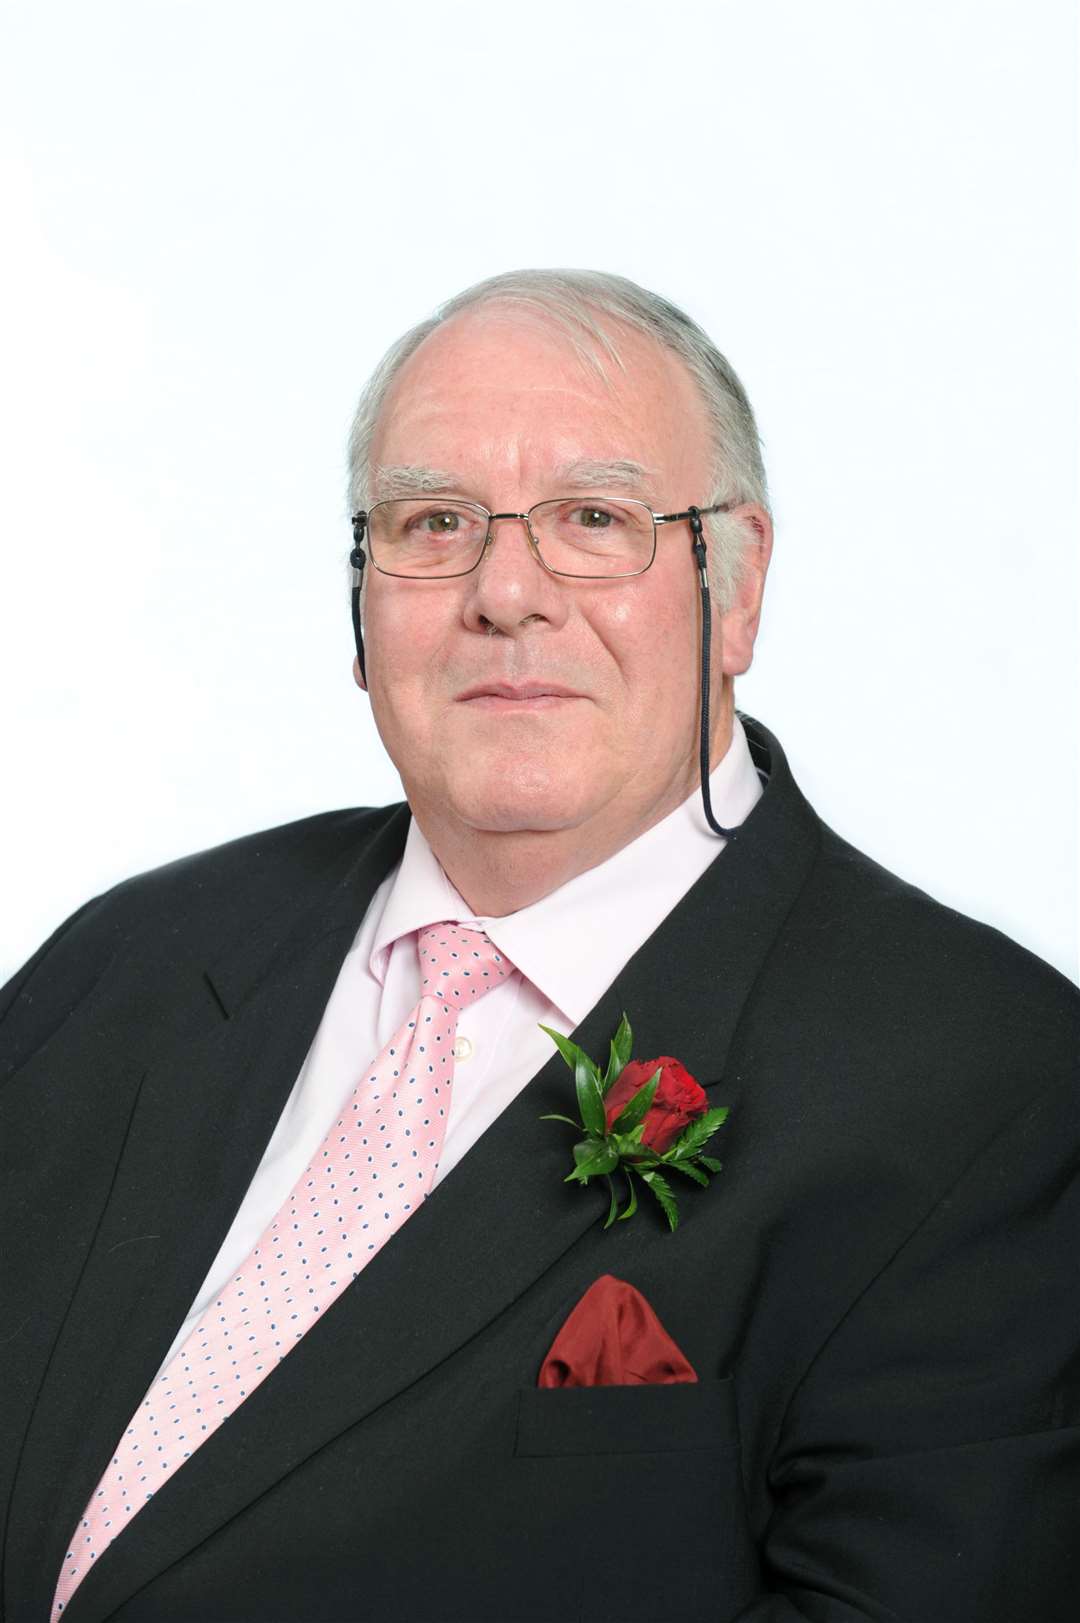 Cllr Tom Maddison believes more emphasis needs to be placed on delivering "family homes".